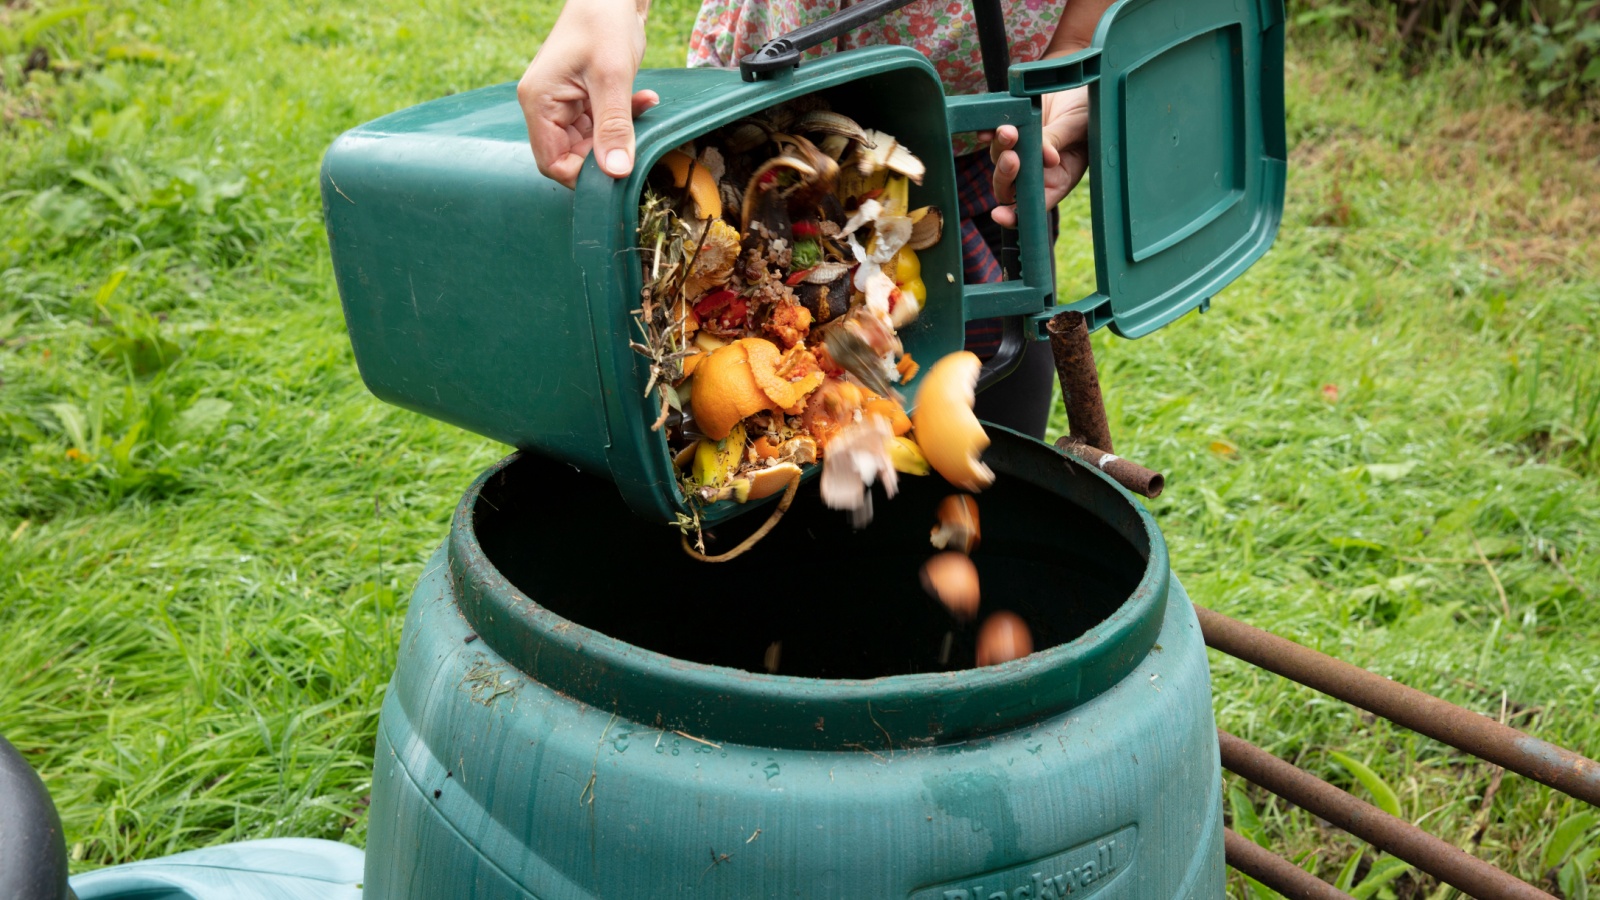 A woman emptying a home composting bin into an outdoor compost bin to reduce waste